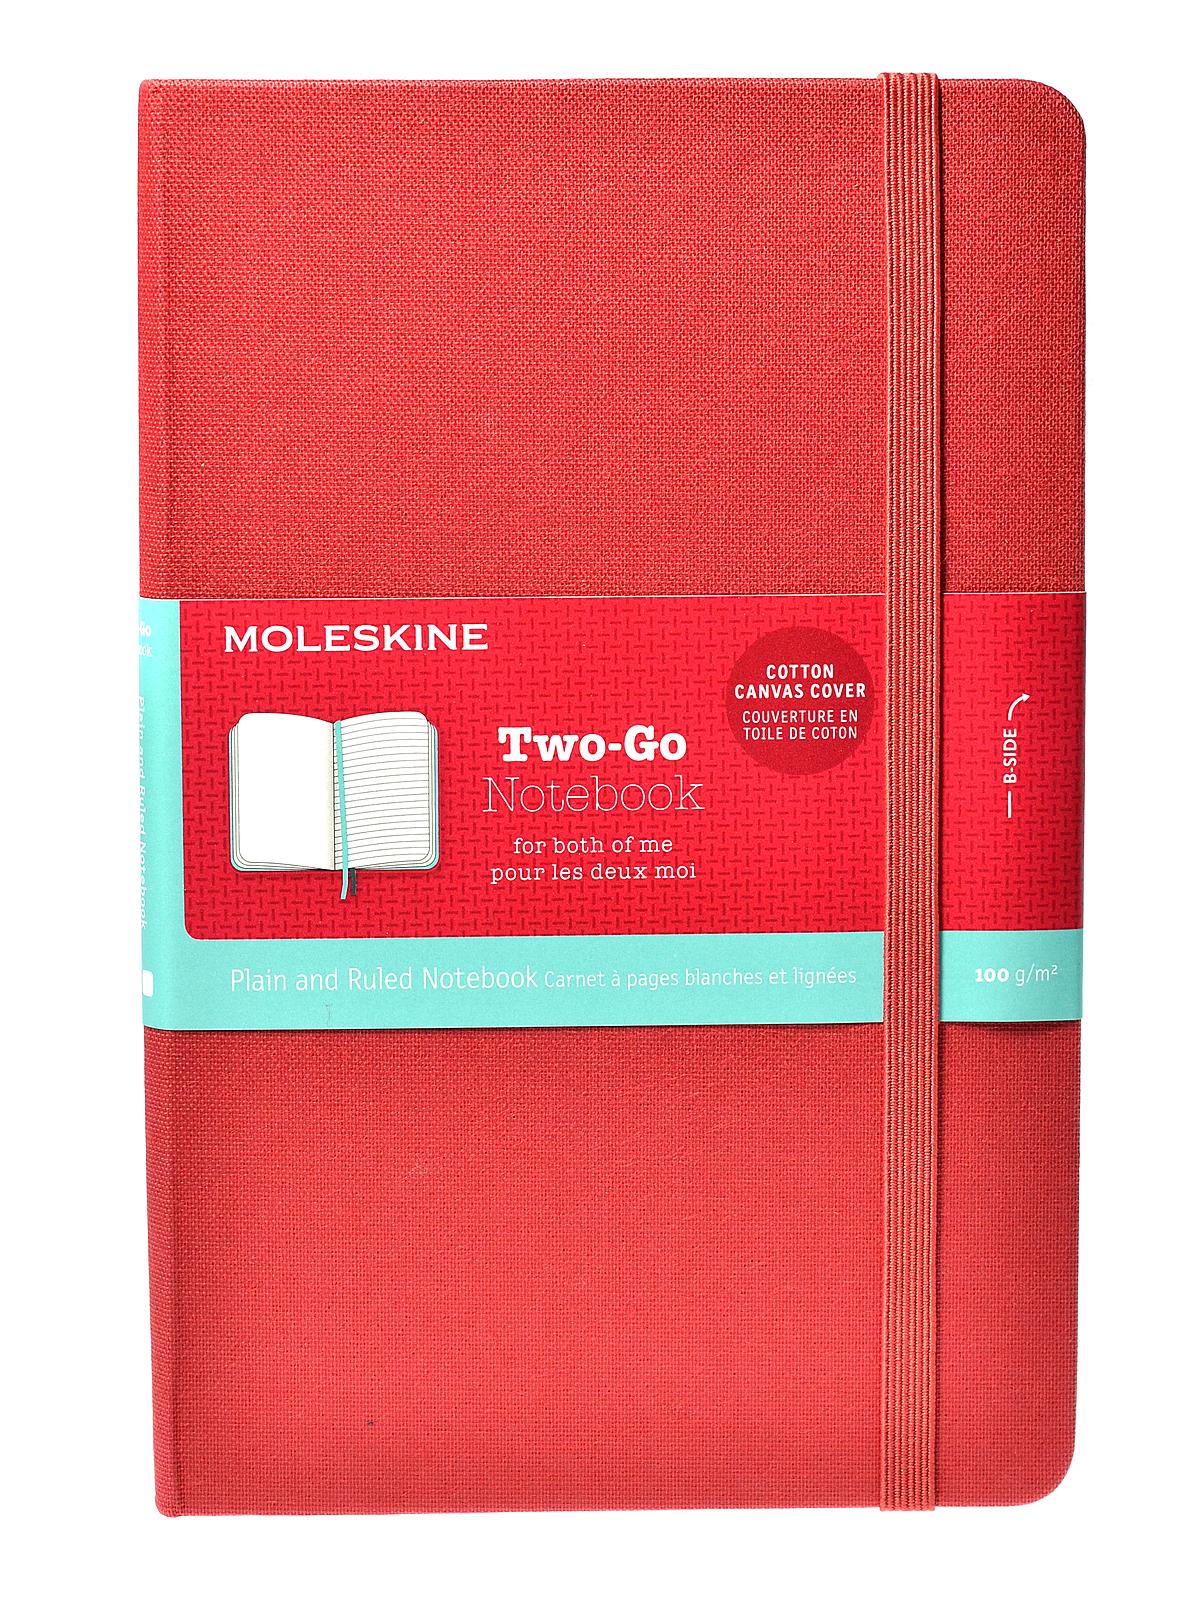 Two-go Notebook Raspberry Red 4 1 2 In. X 7 In. 144 Pages